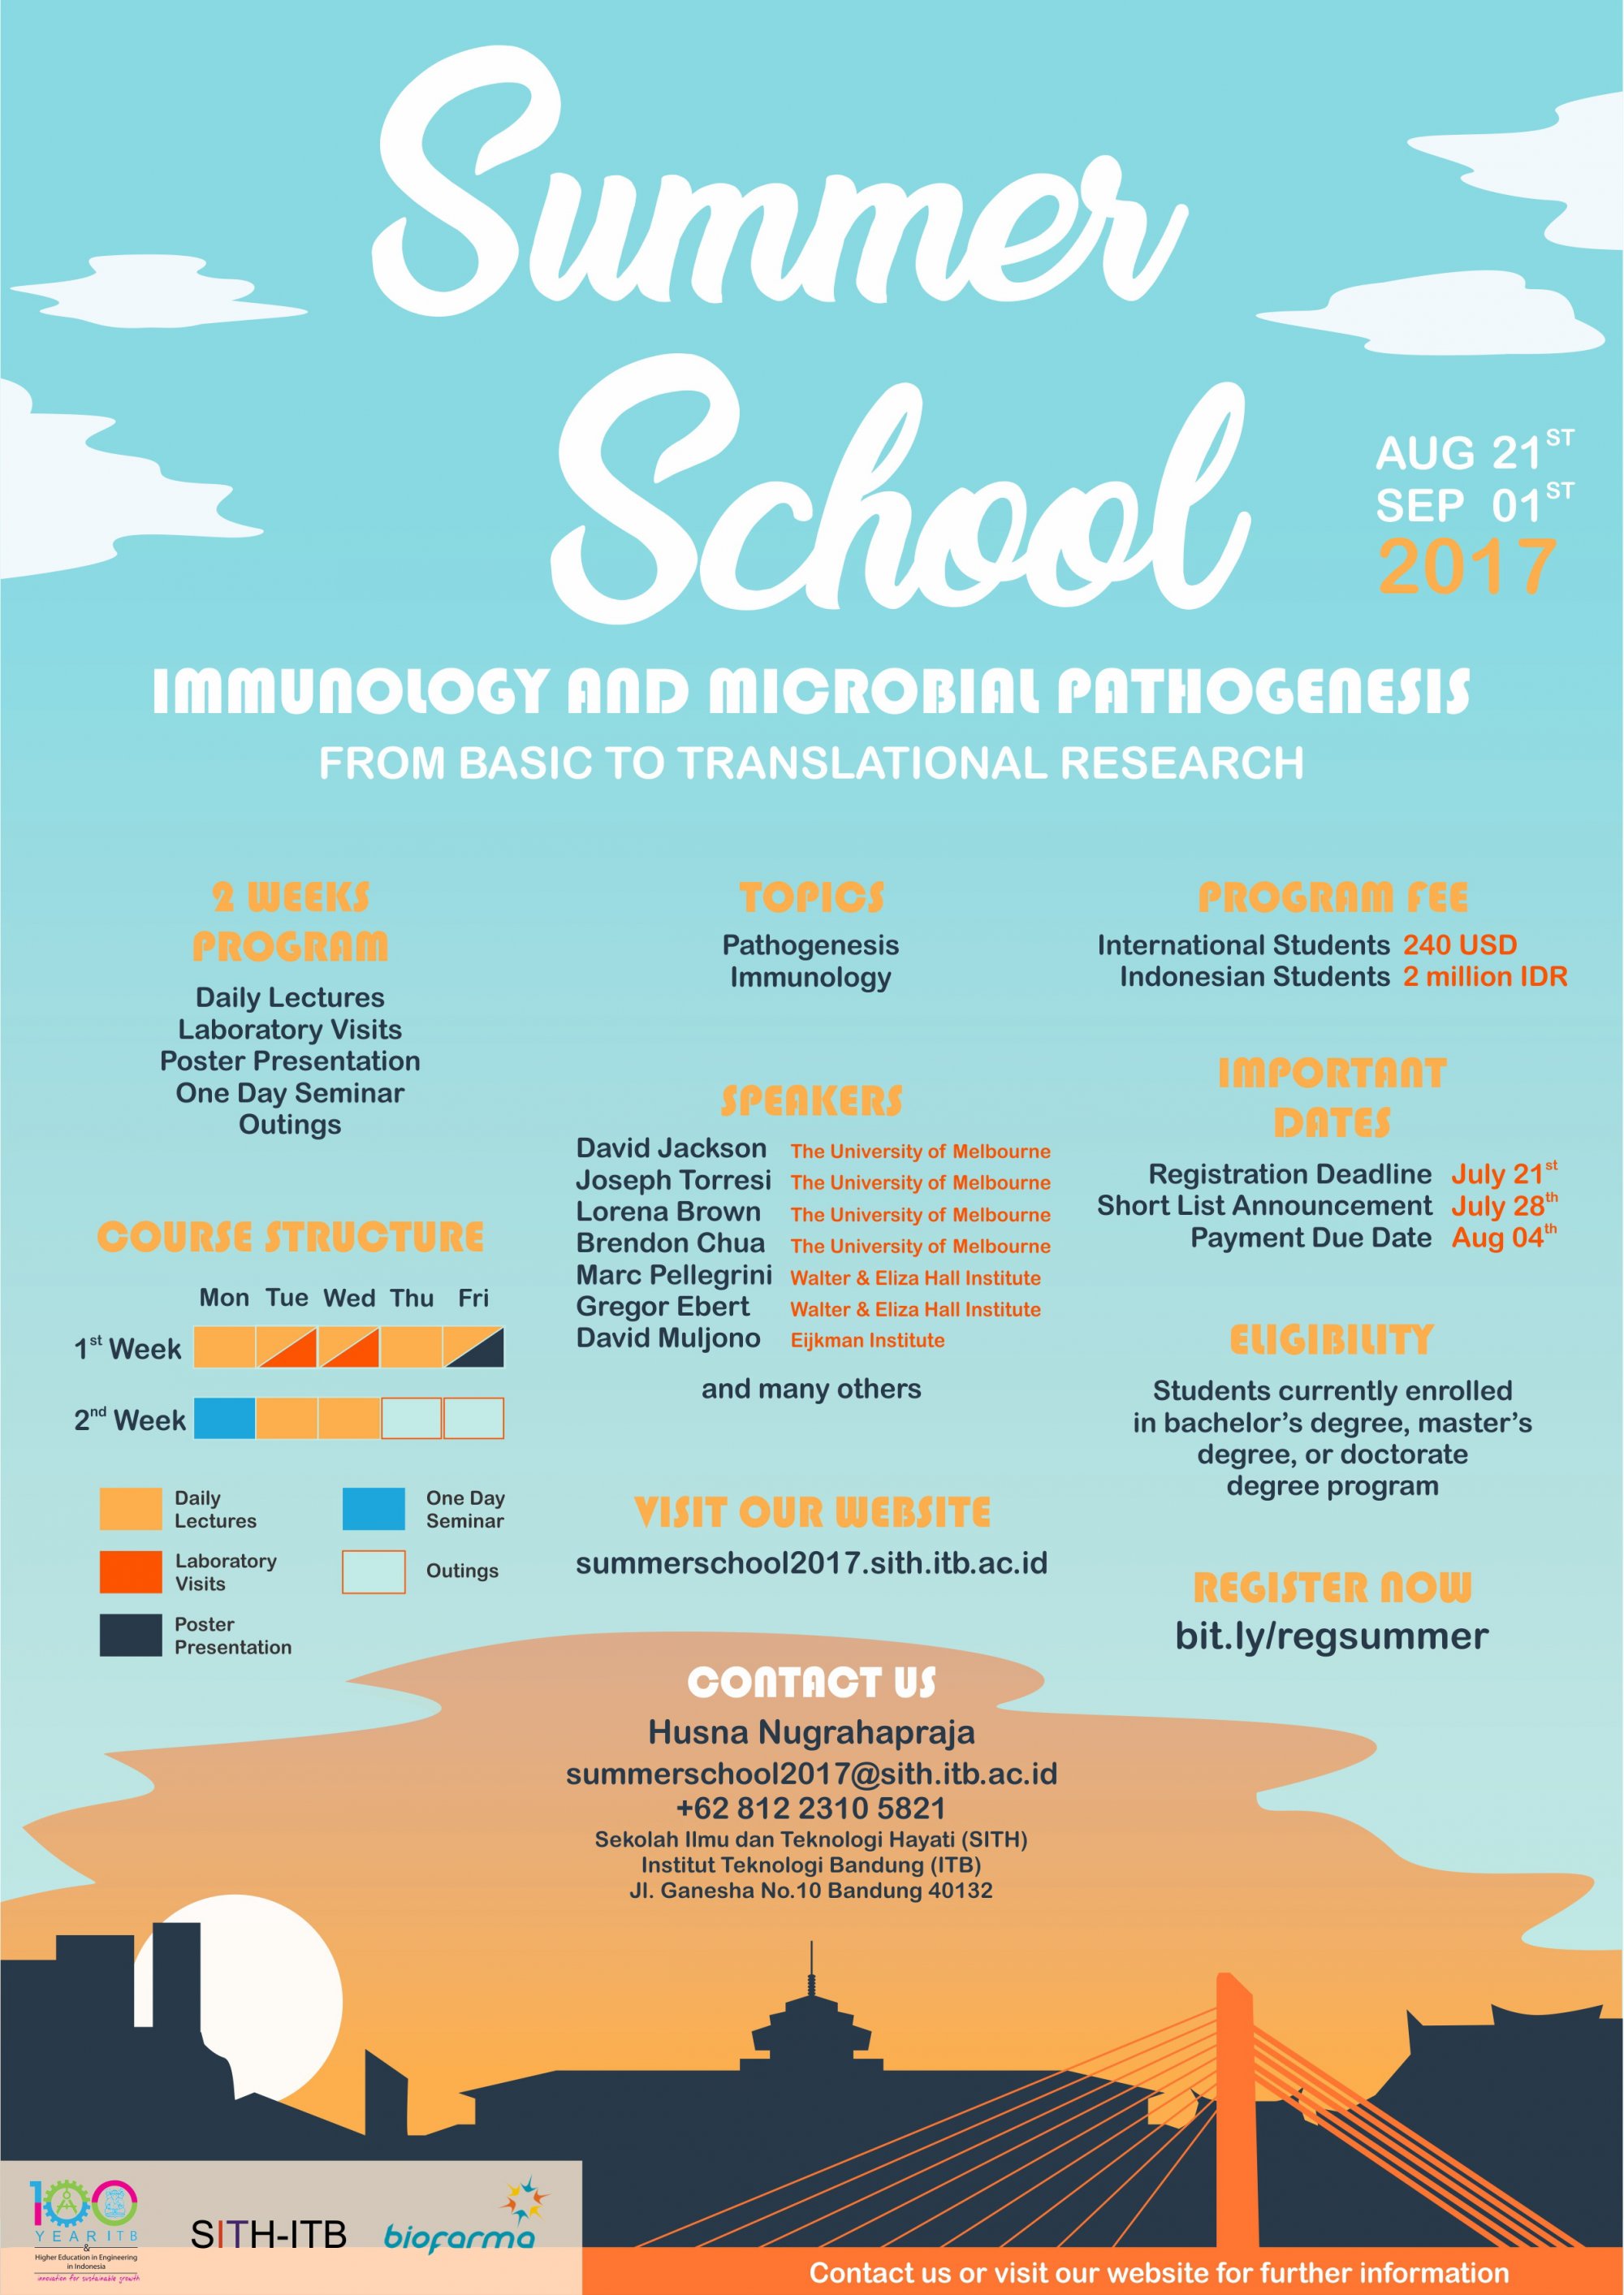 Invitation for summer school in immunology and microbial pathogenesis